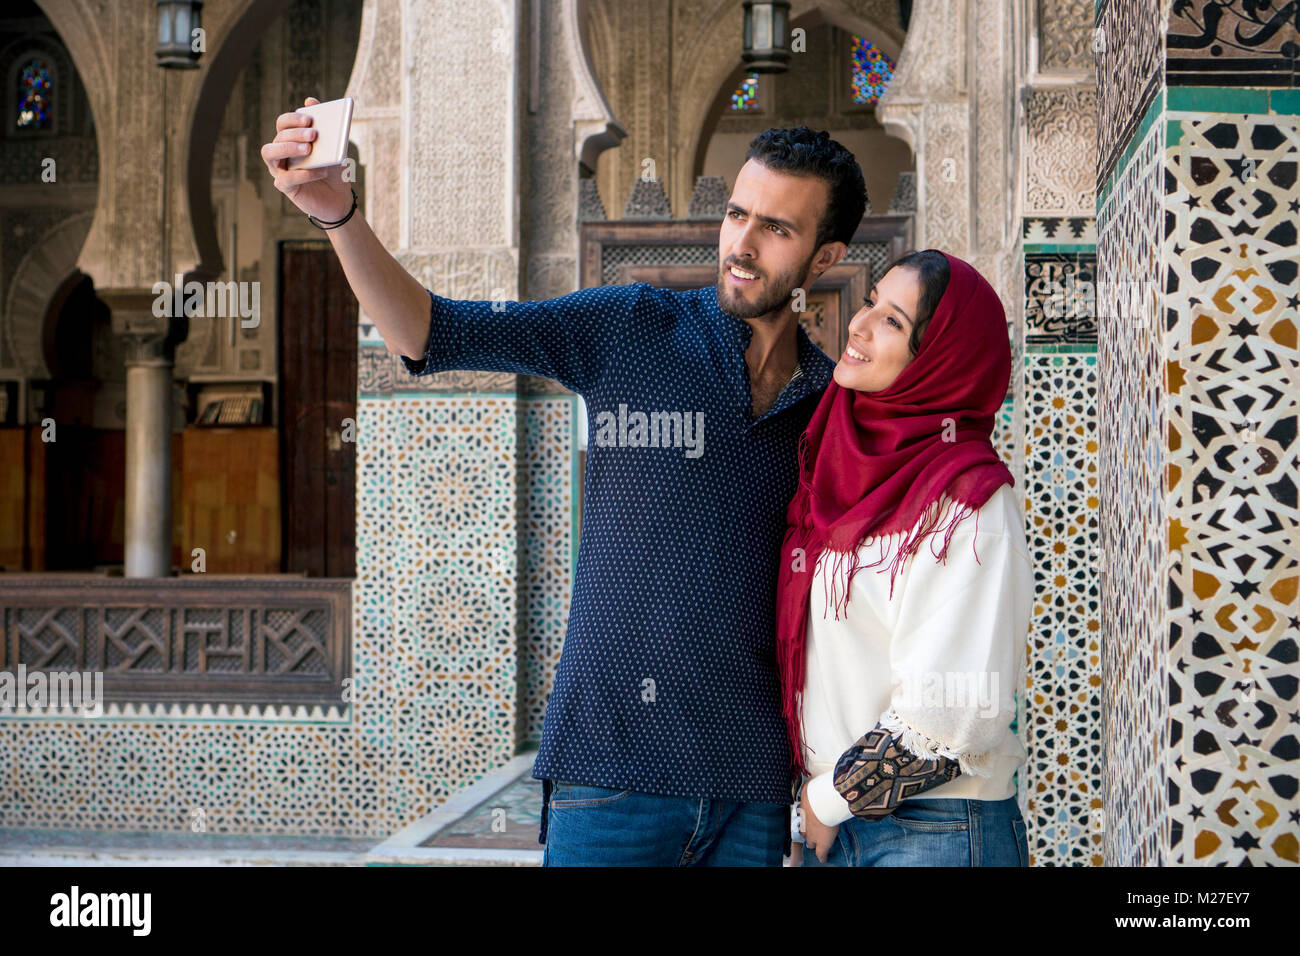 Arab couple smiling and taking selfie with mobile phone Stock Photo